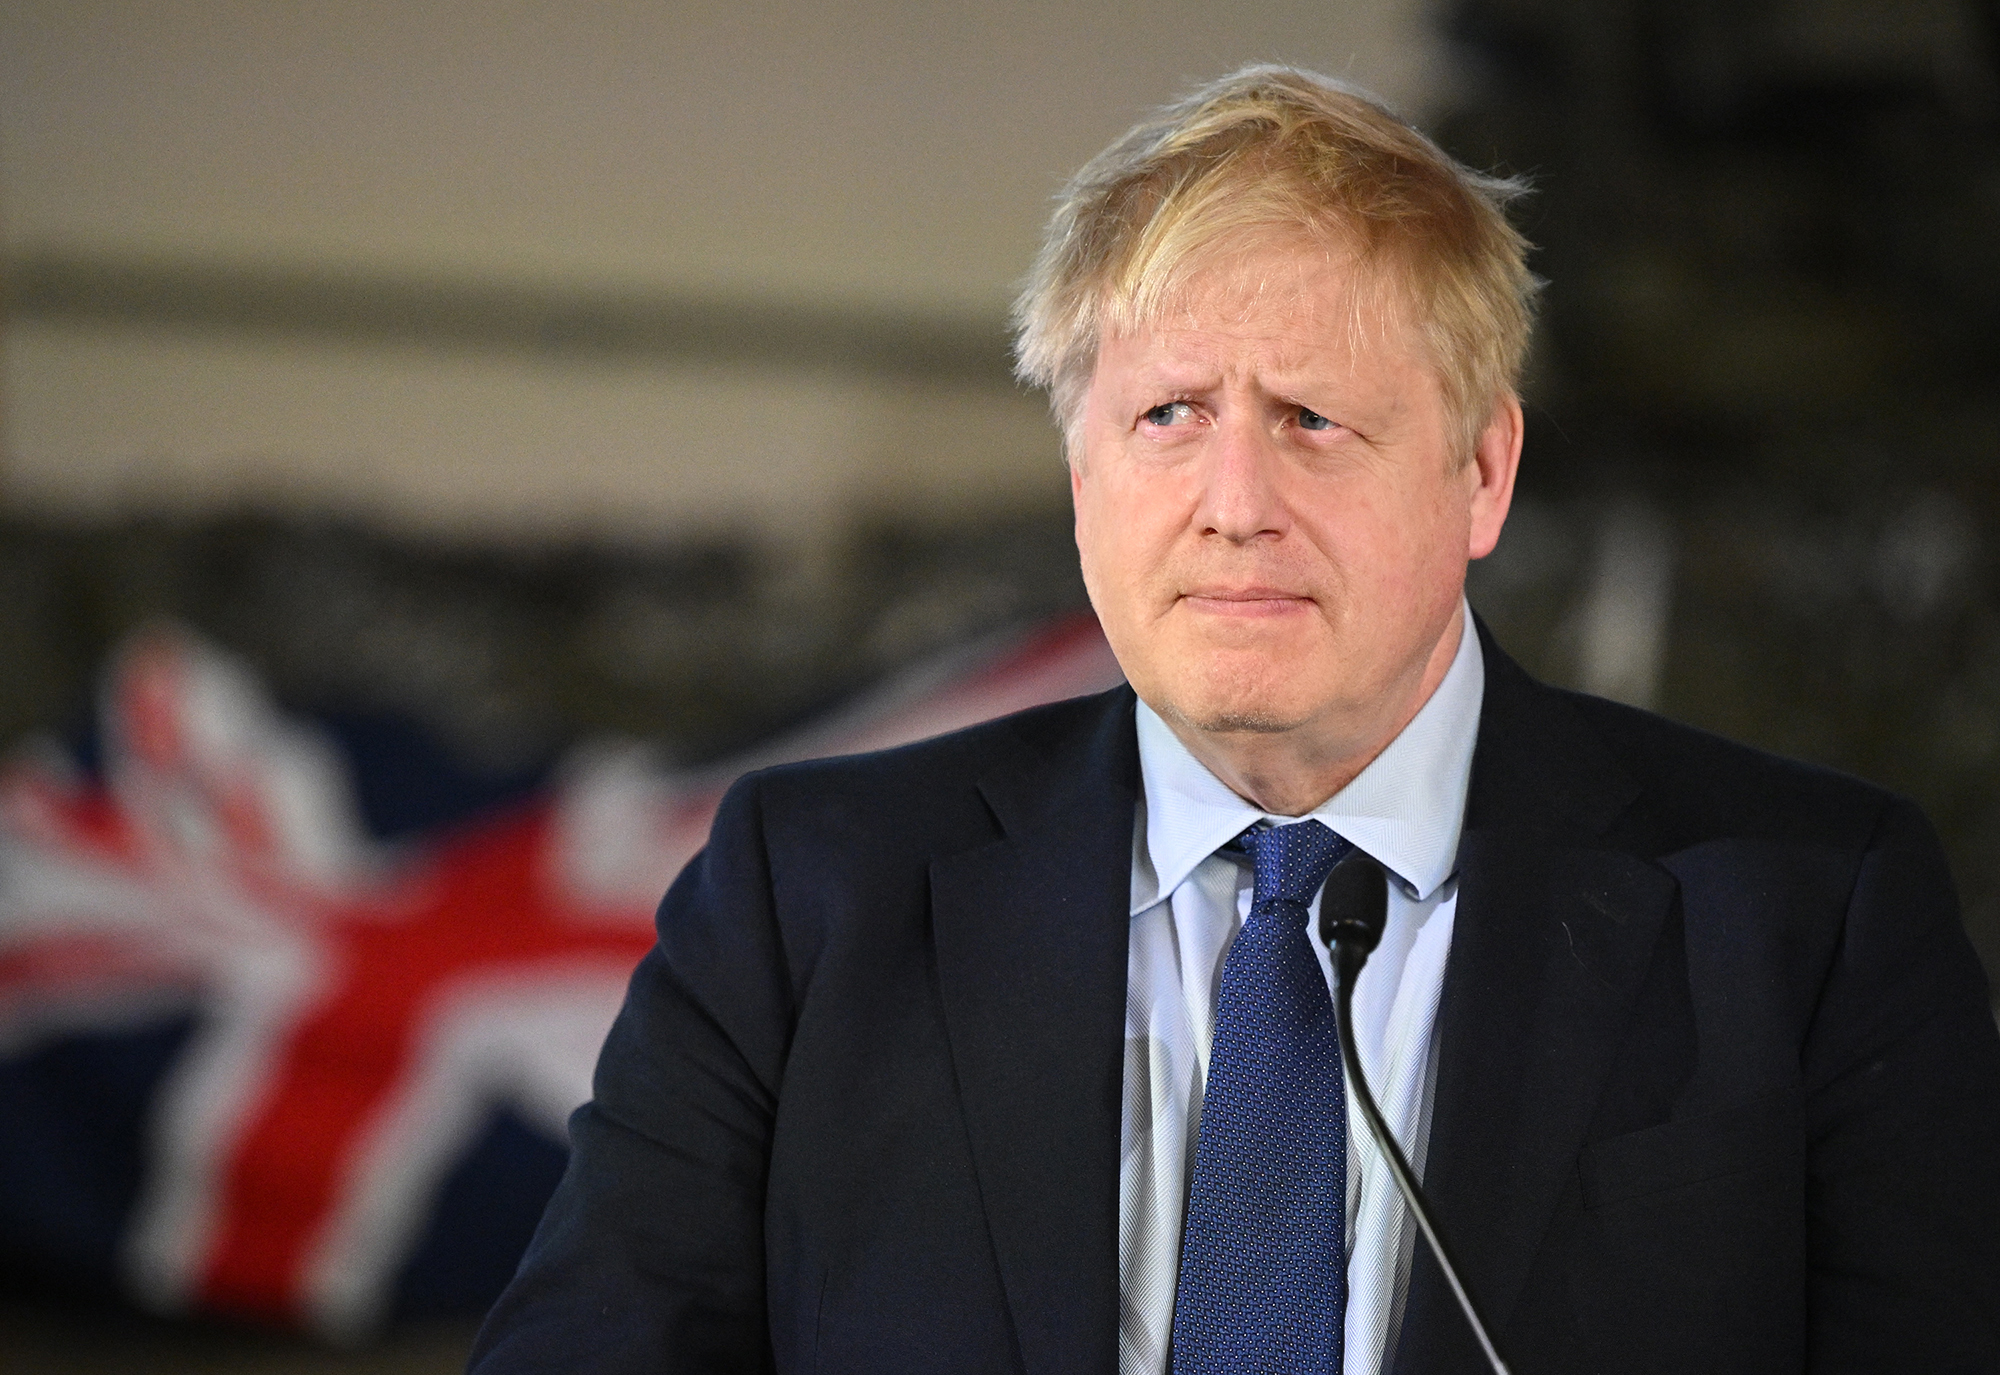 UK Prime Minister Boris Johnson speaks during a joint press conference on March 1 in Tallinn, Estonia. 